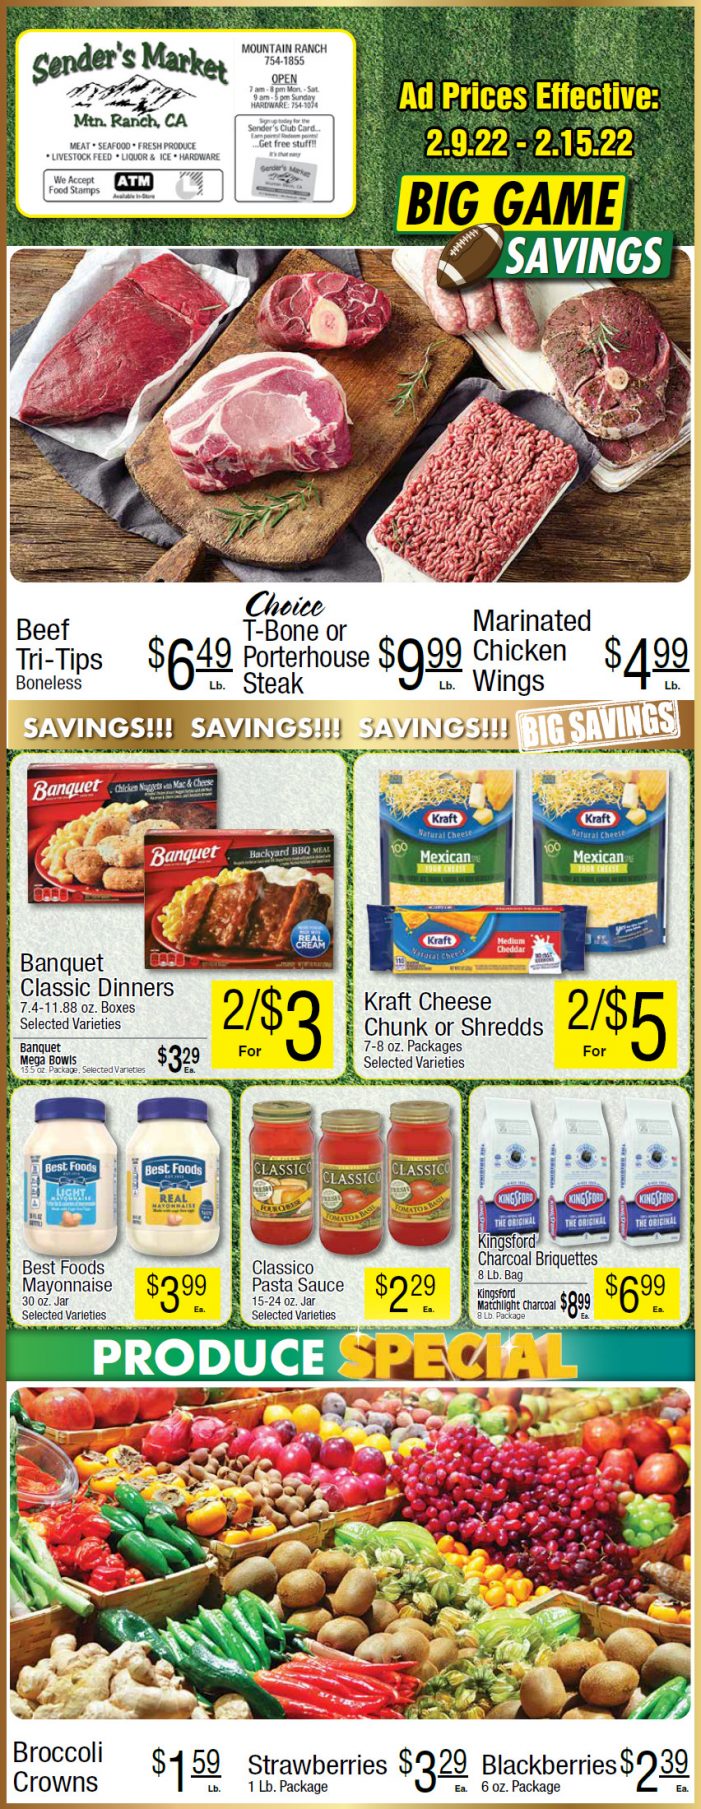 Sender’s Market’s Weekly Ad & Grocery Specials February 9th ~ 15th! Shop Local & Save!